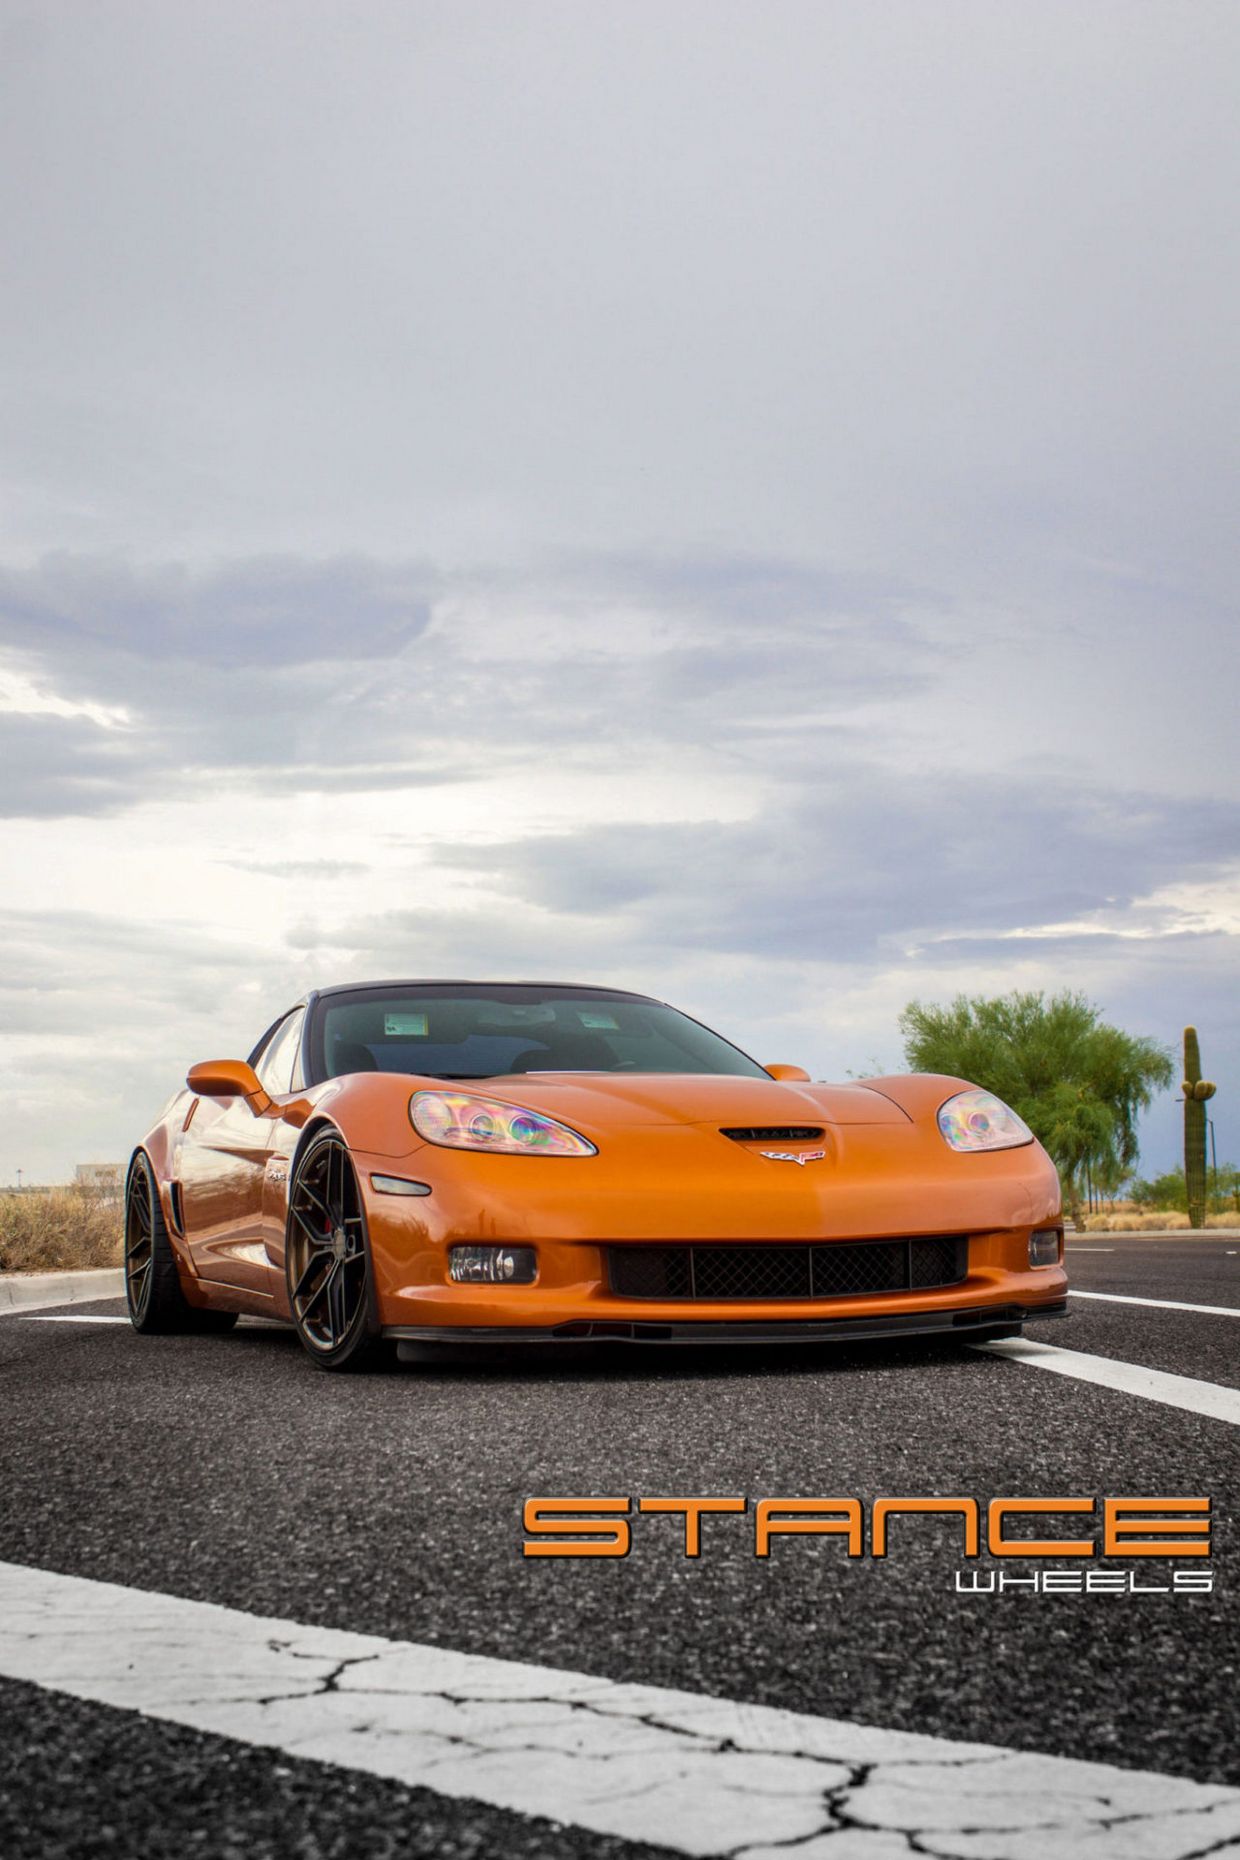 Stance SF03 on Chevy Corvette